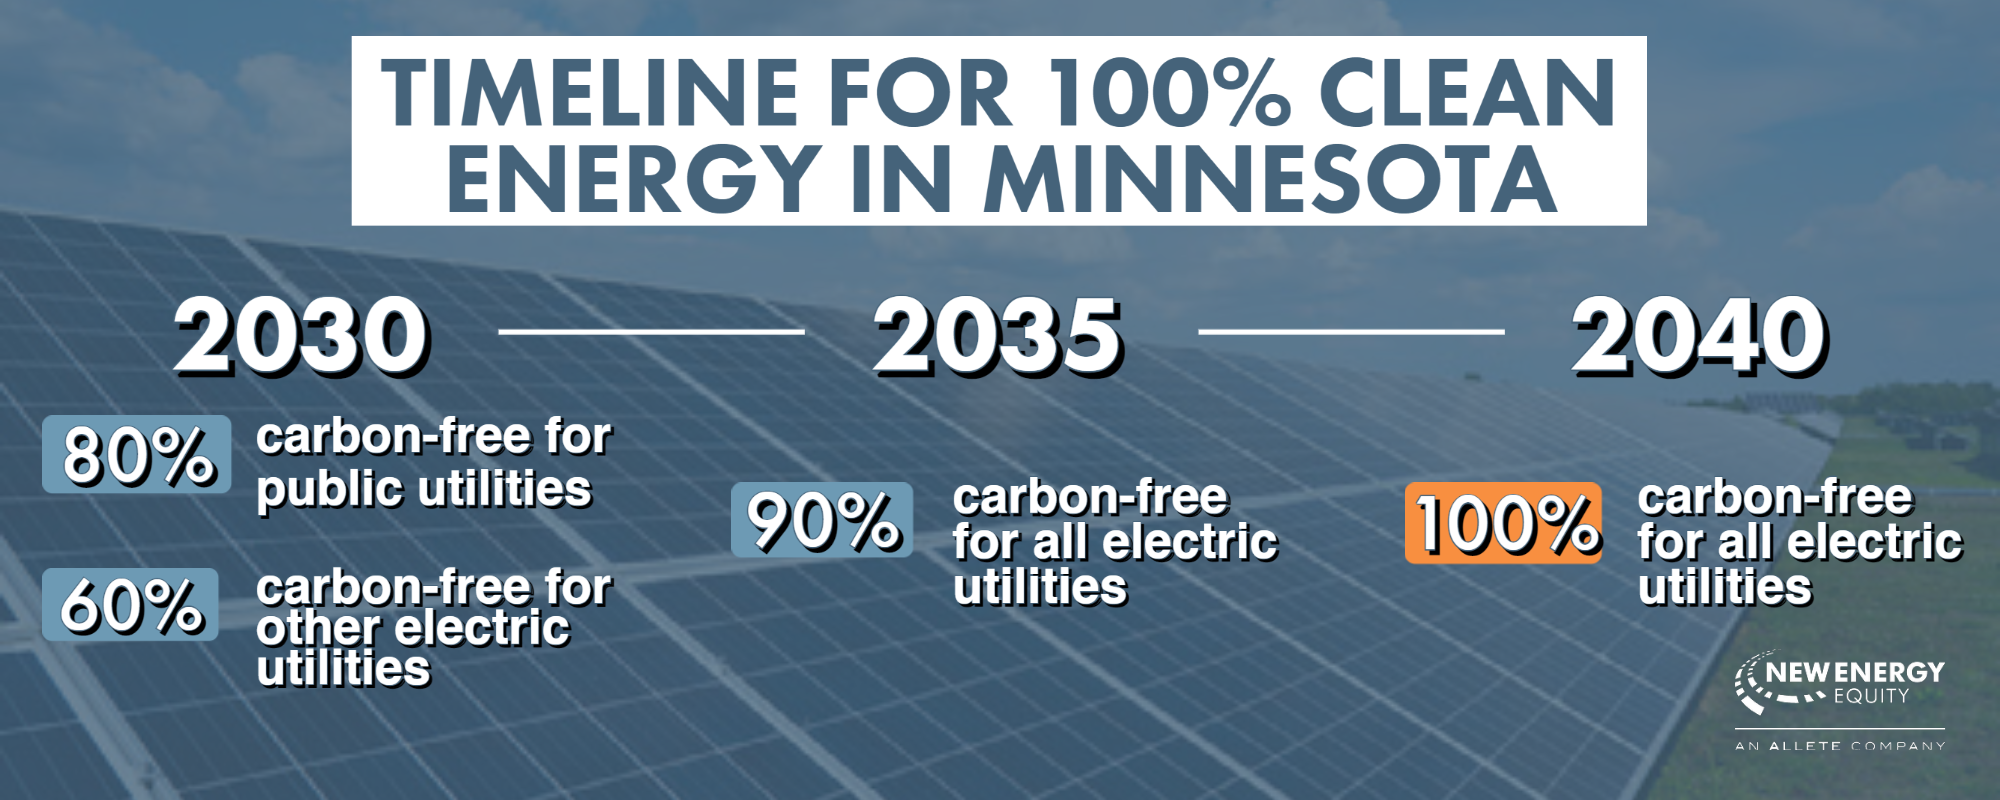 Timeline for 100% Clean Energy in Minnesota